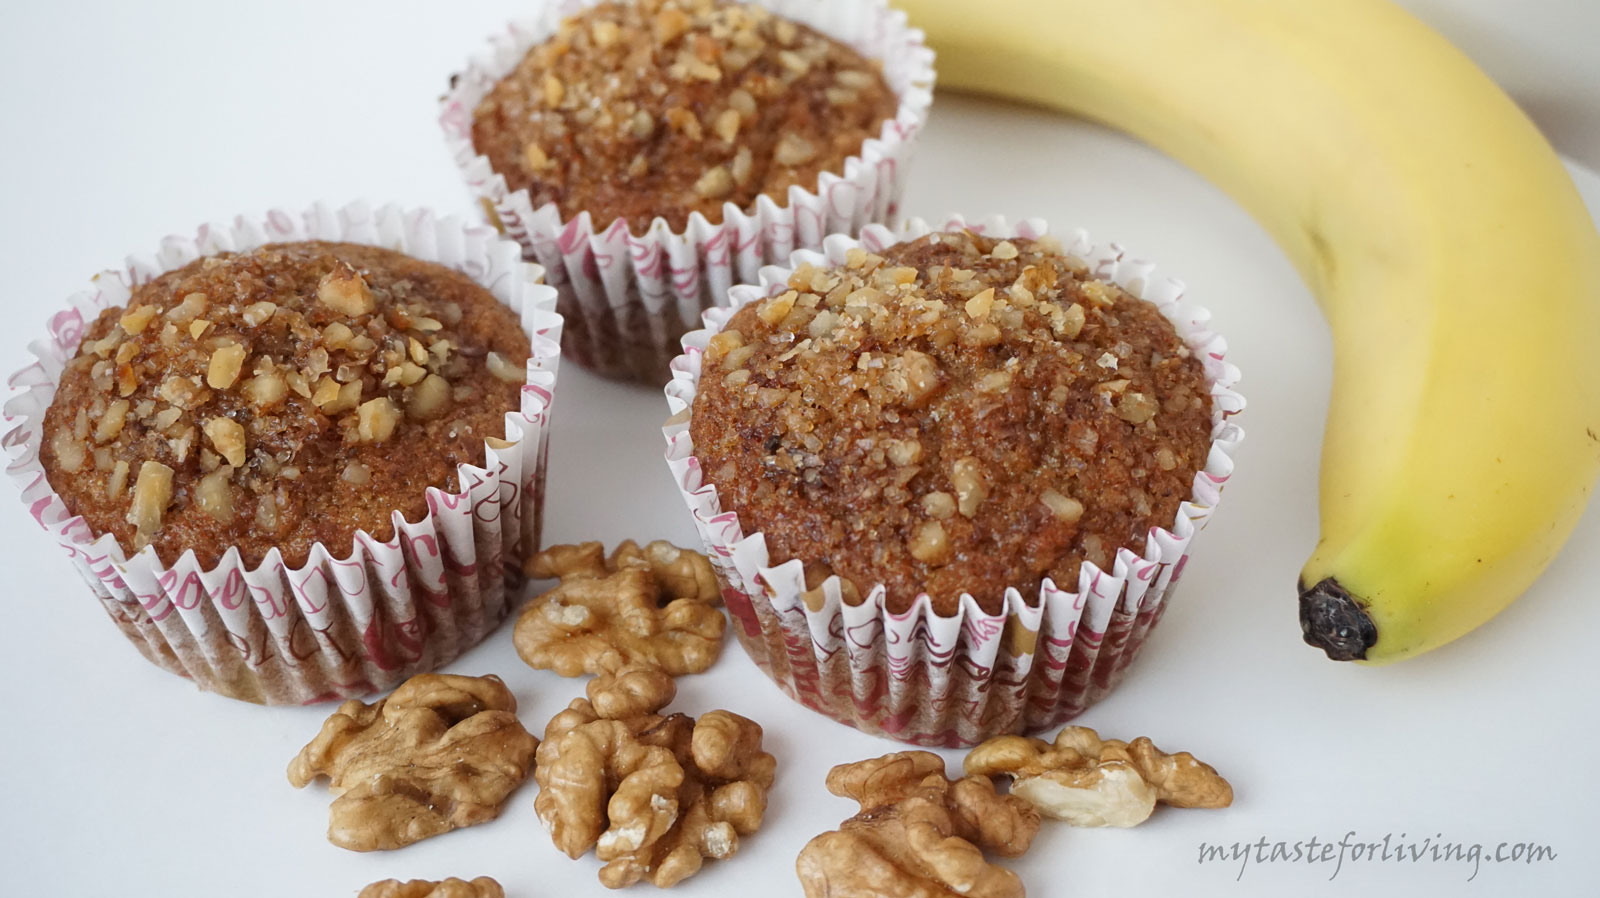 Delicious and quick muffins with bananas, walnuts and einkorn flour.